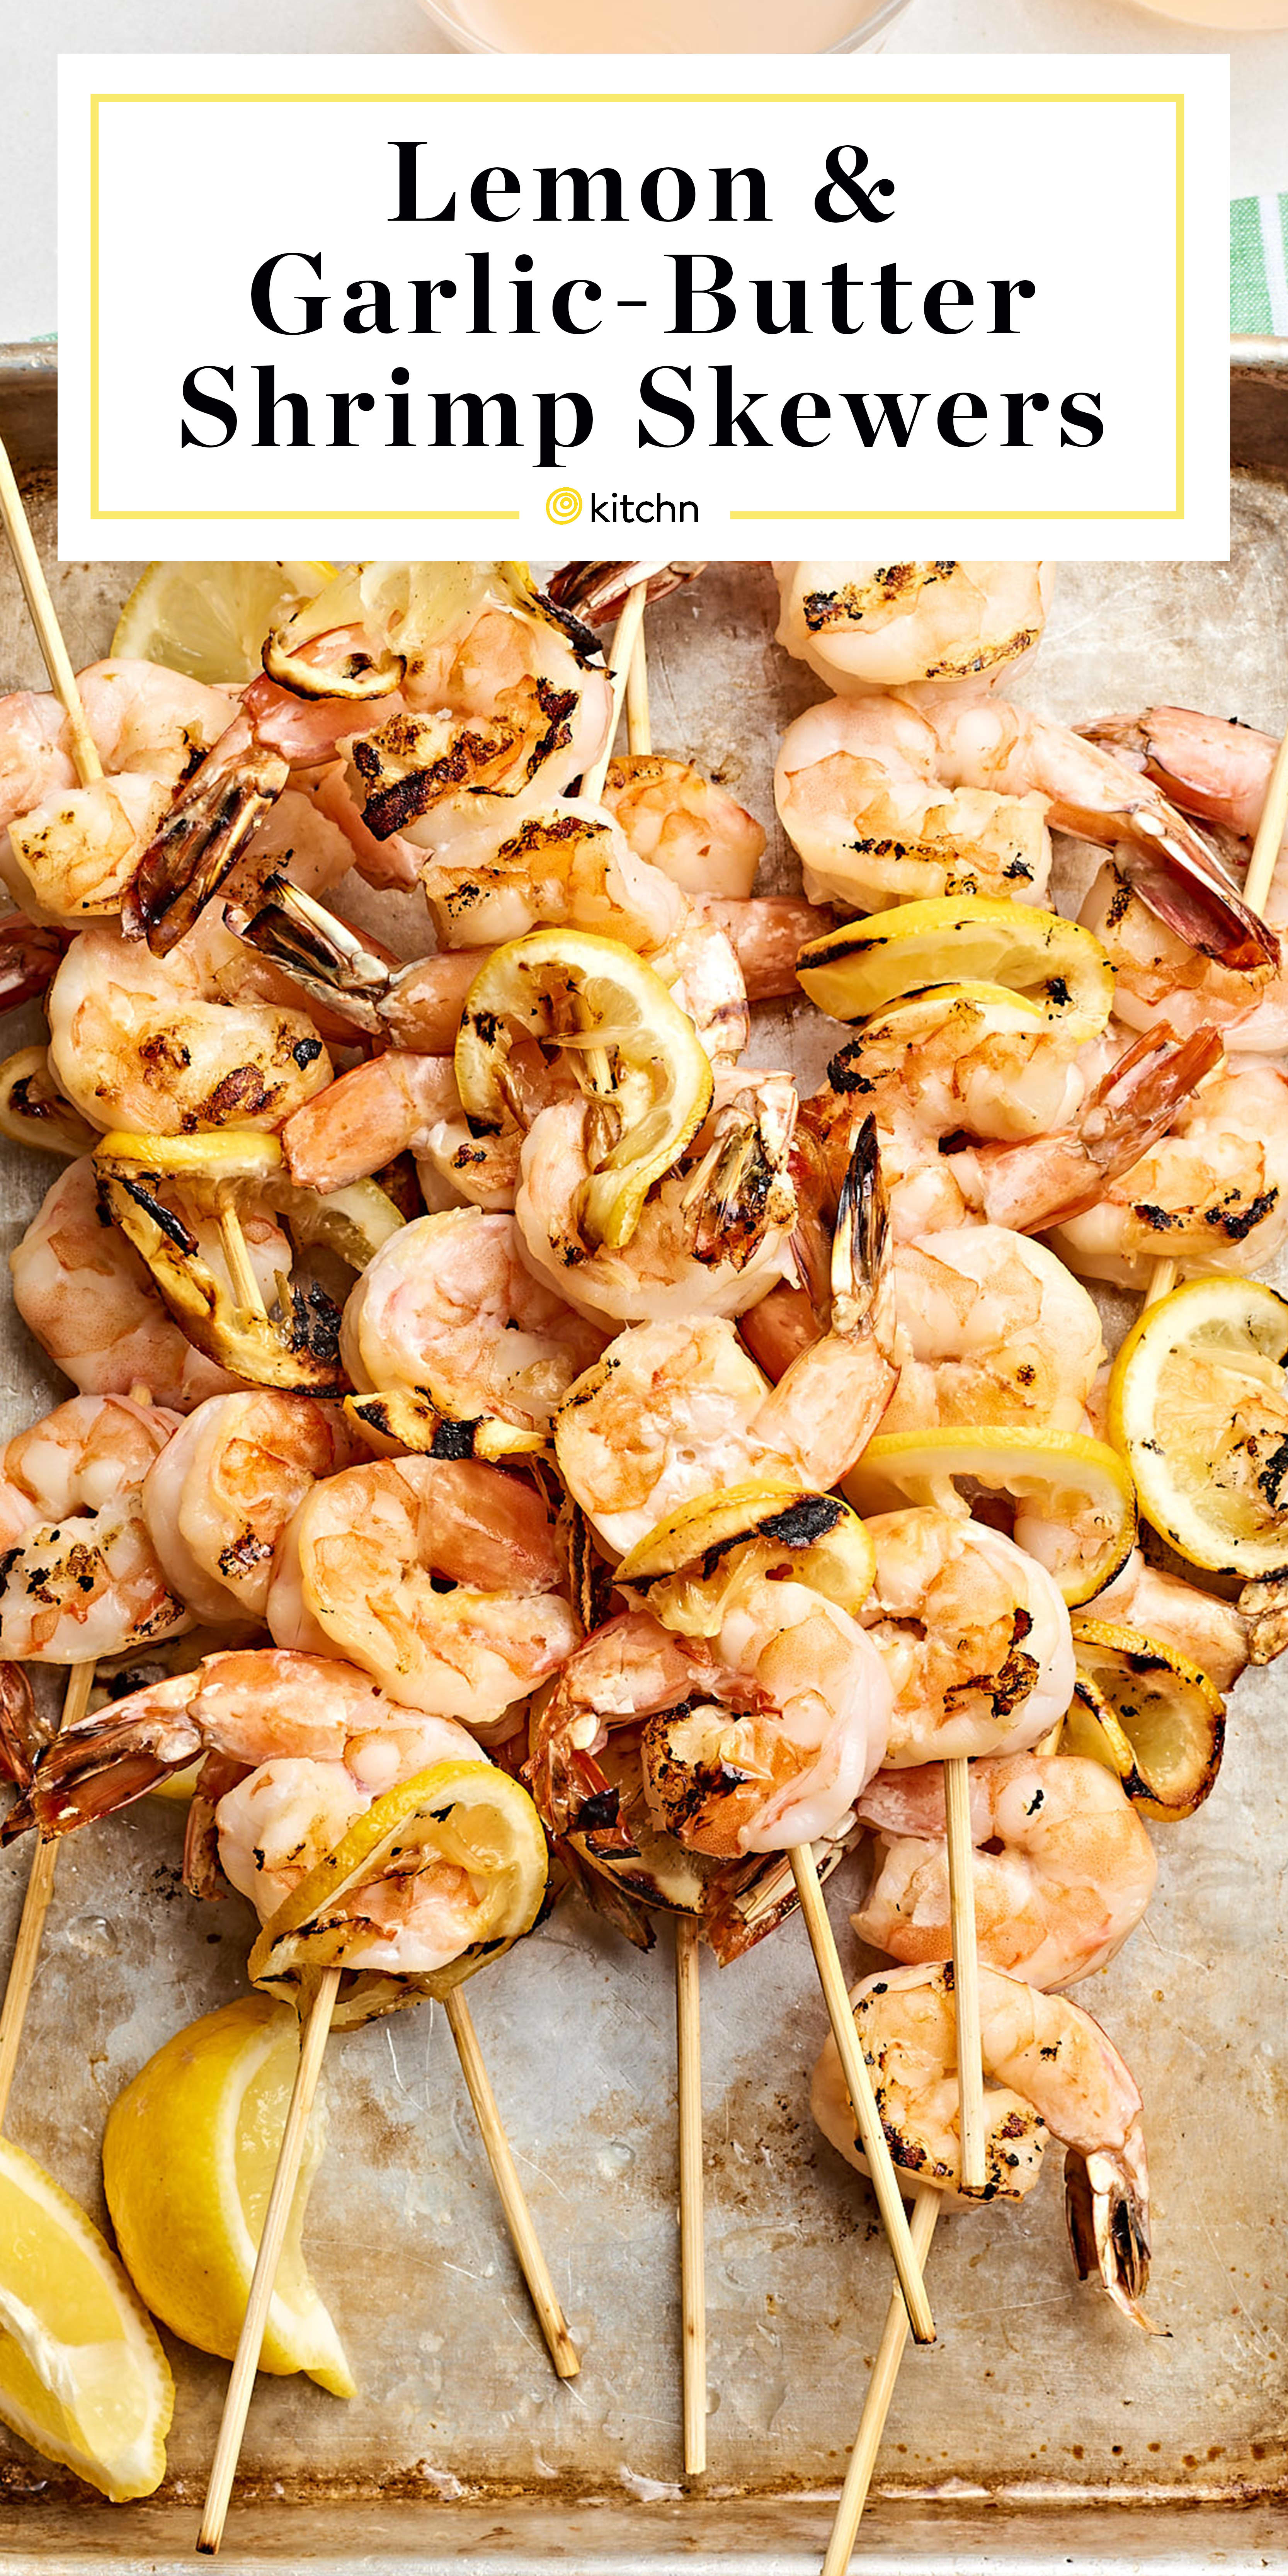 Garlic Butter Shrimp Skewers Kitchn,Rubber Band Tricks With One Rubber Band